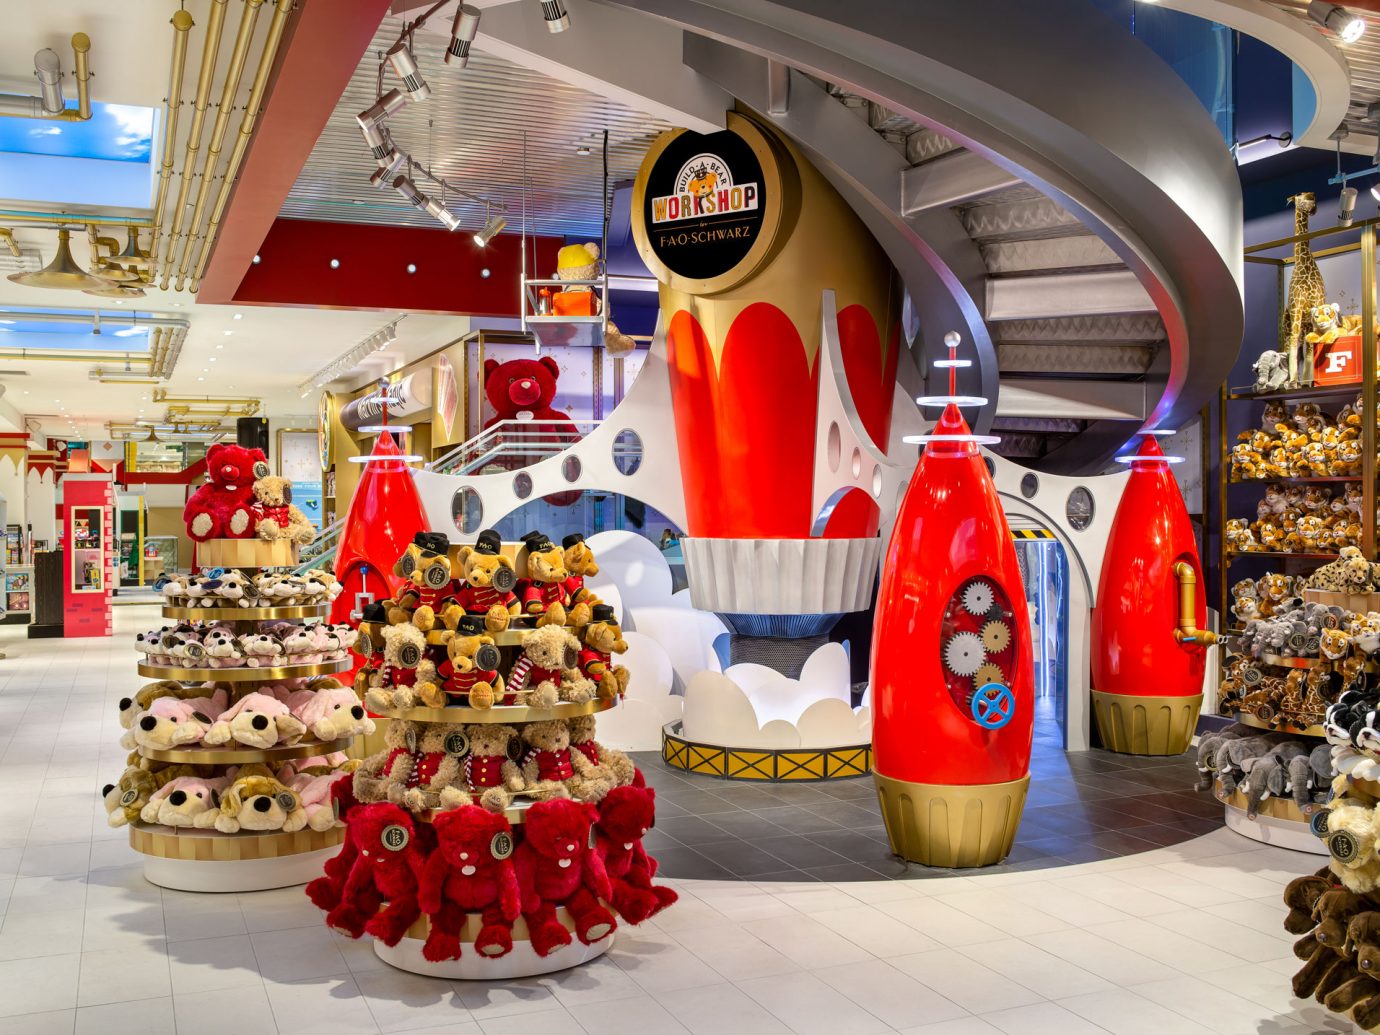 FAO Schwartz interior with a large rocket display